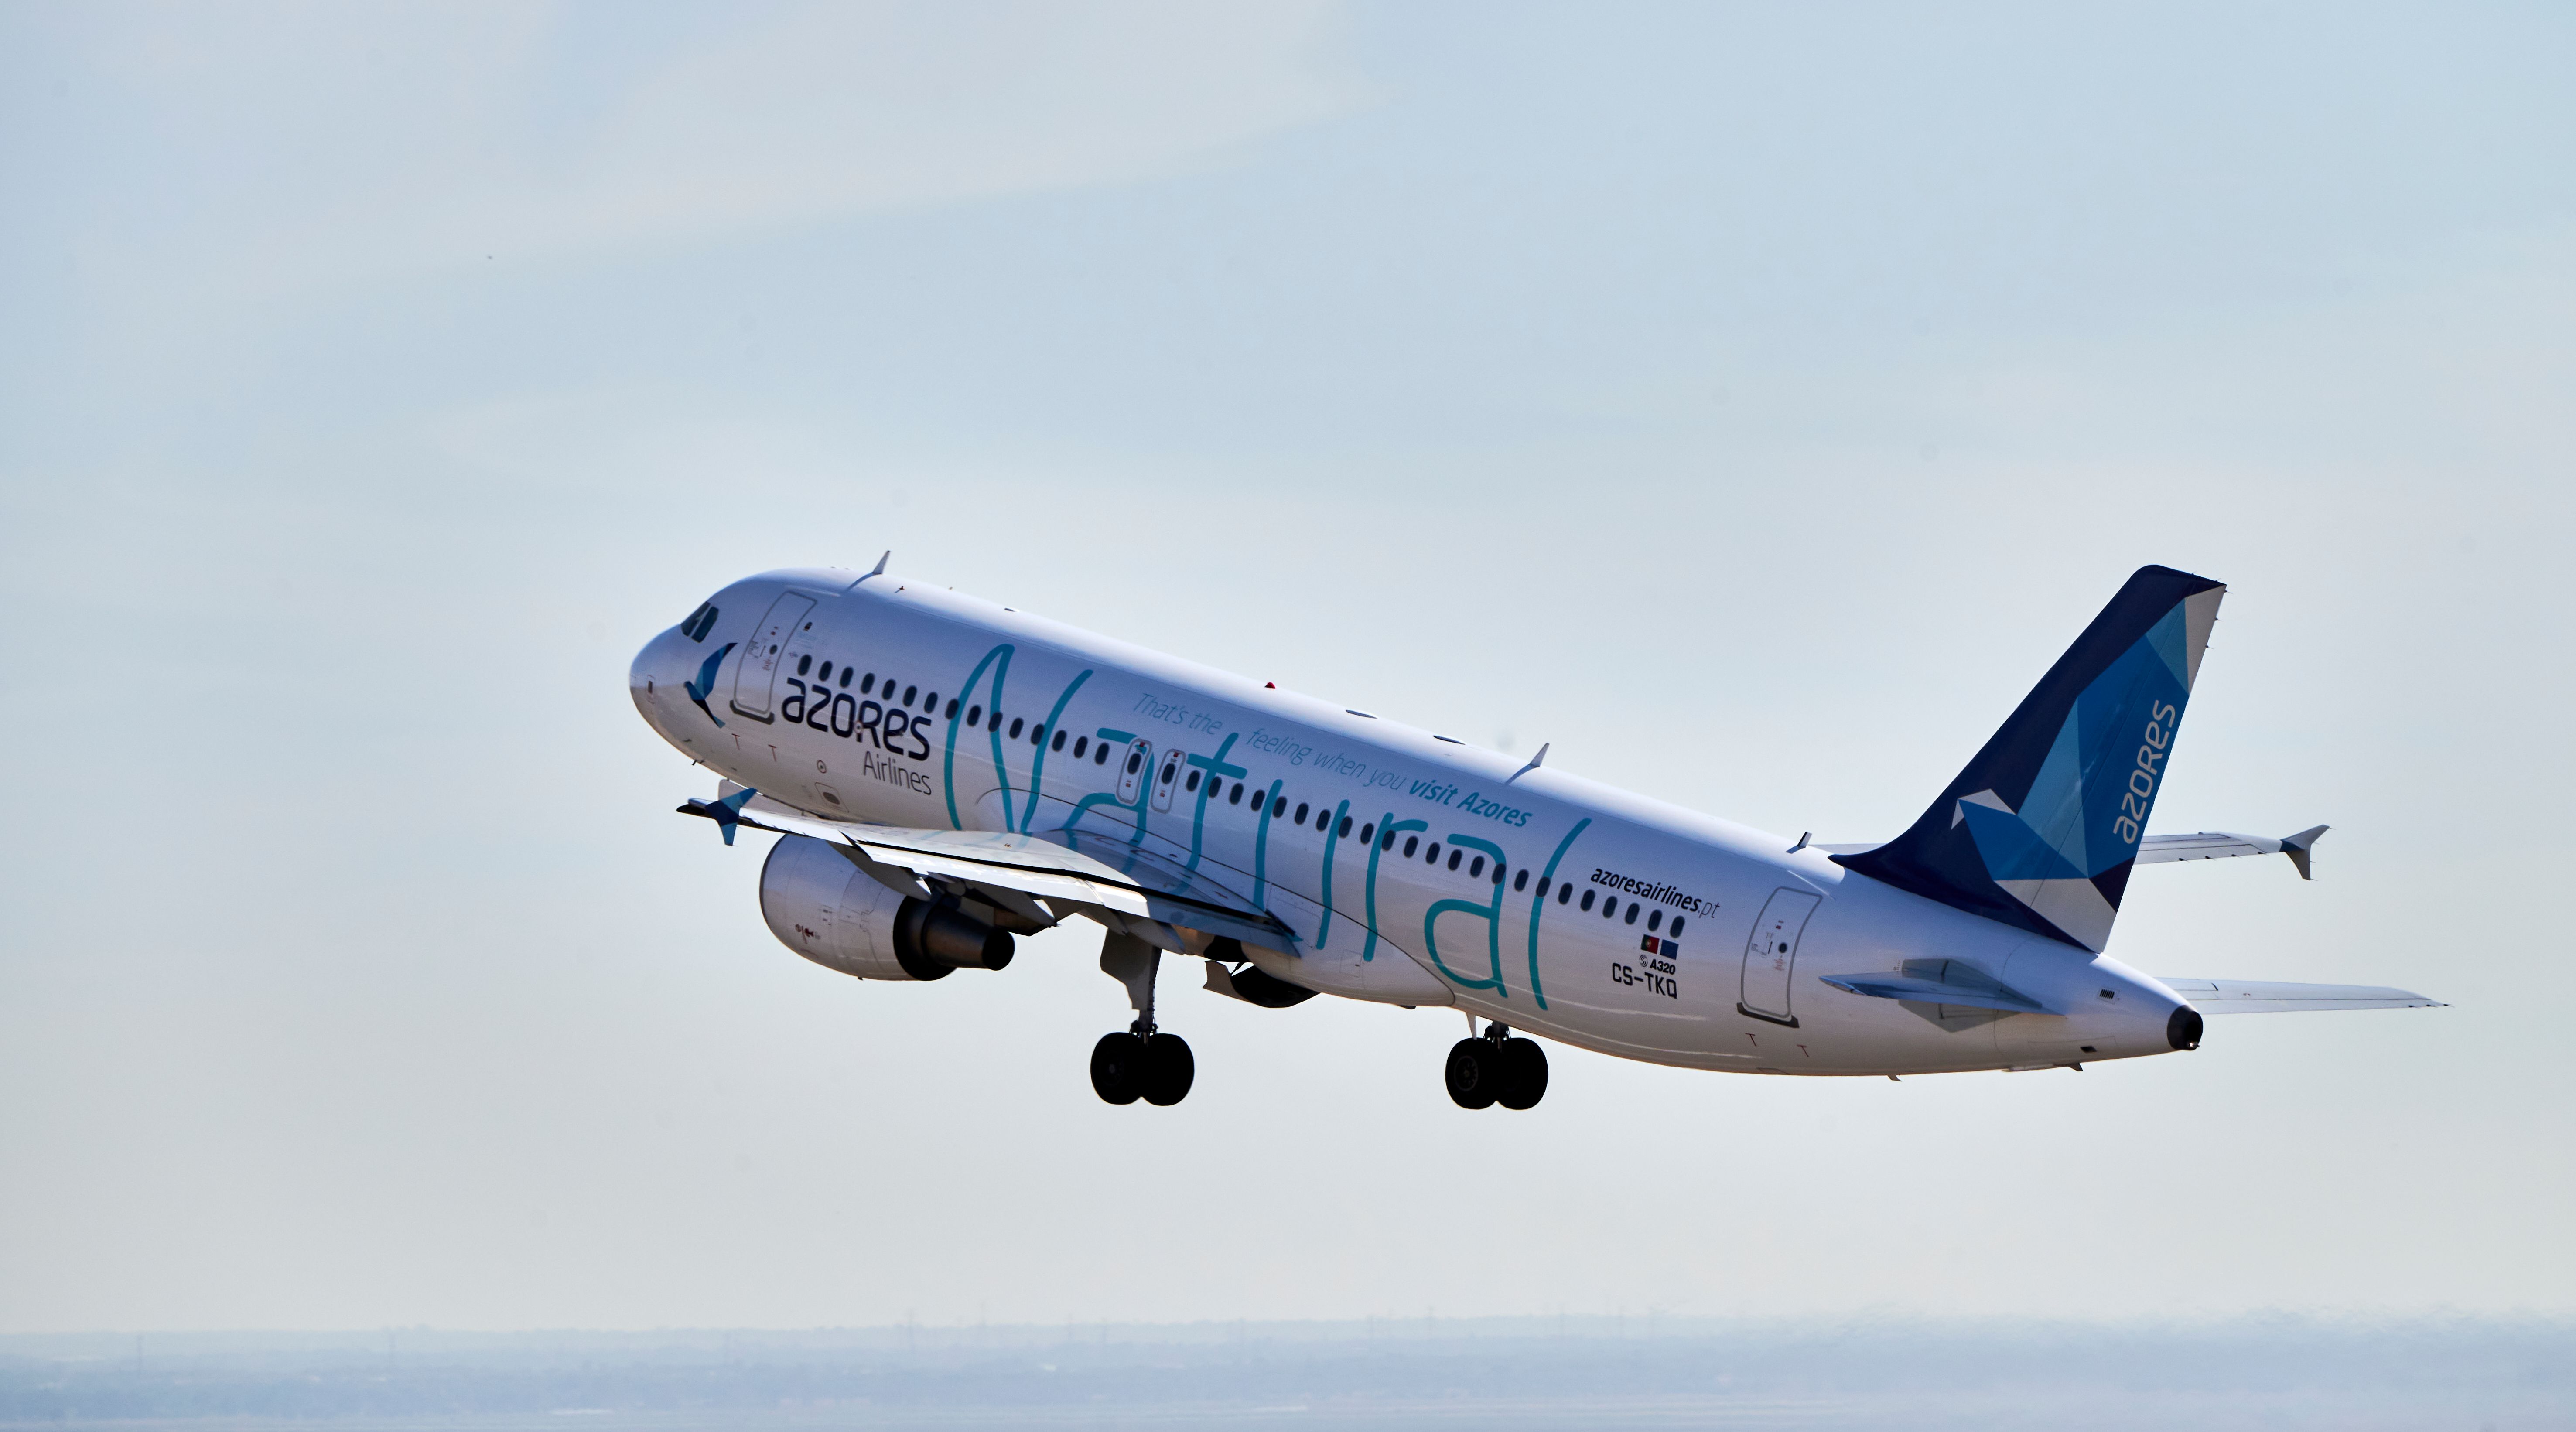 Azores Airlines Airbus A320 in Natural livery during take off